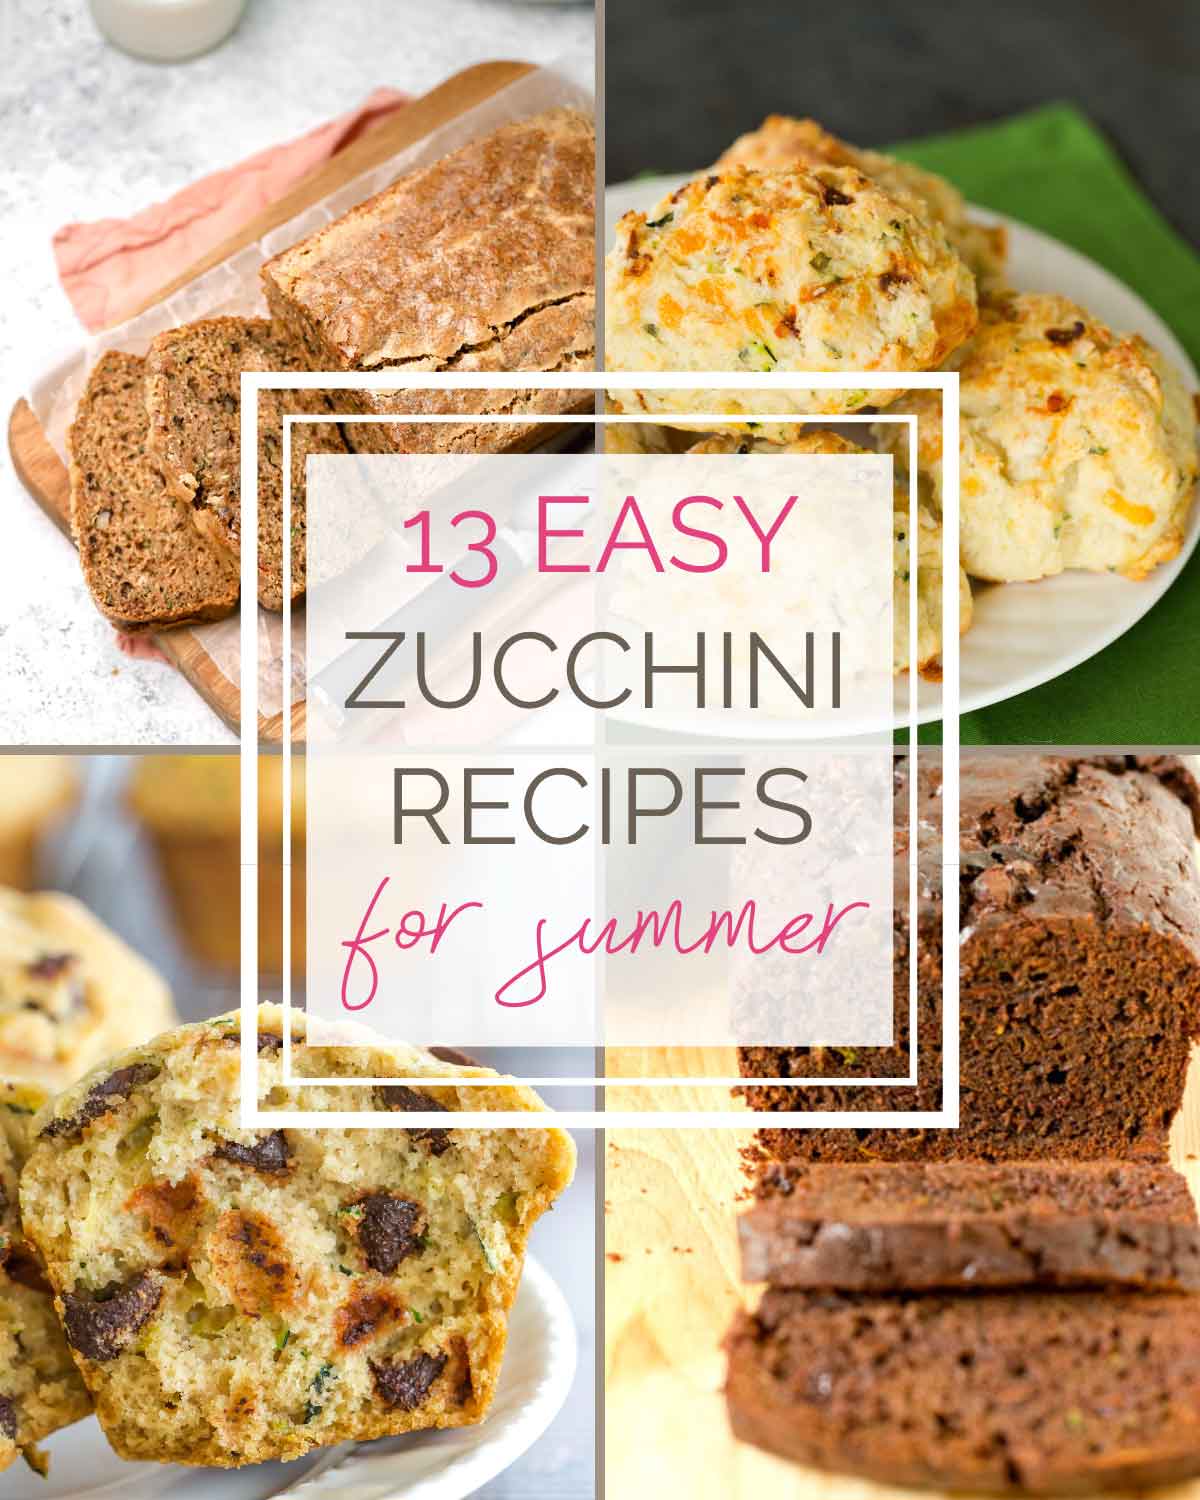 A grid of four recipes using zucchini with text overlay "13 Easy Zucchini Recipes for Summer".